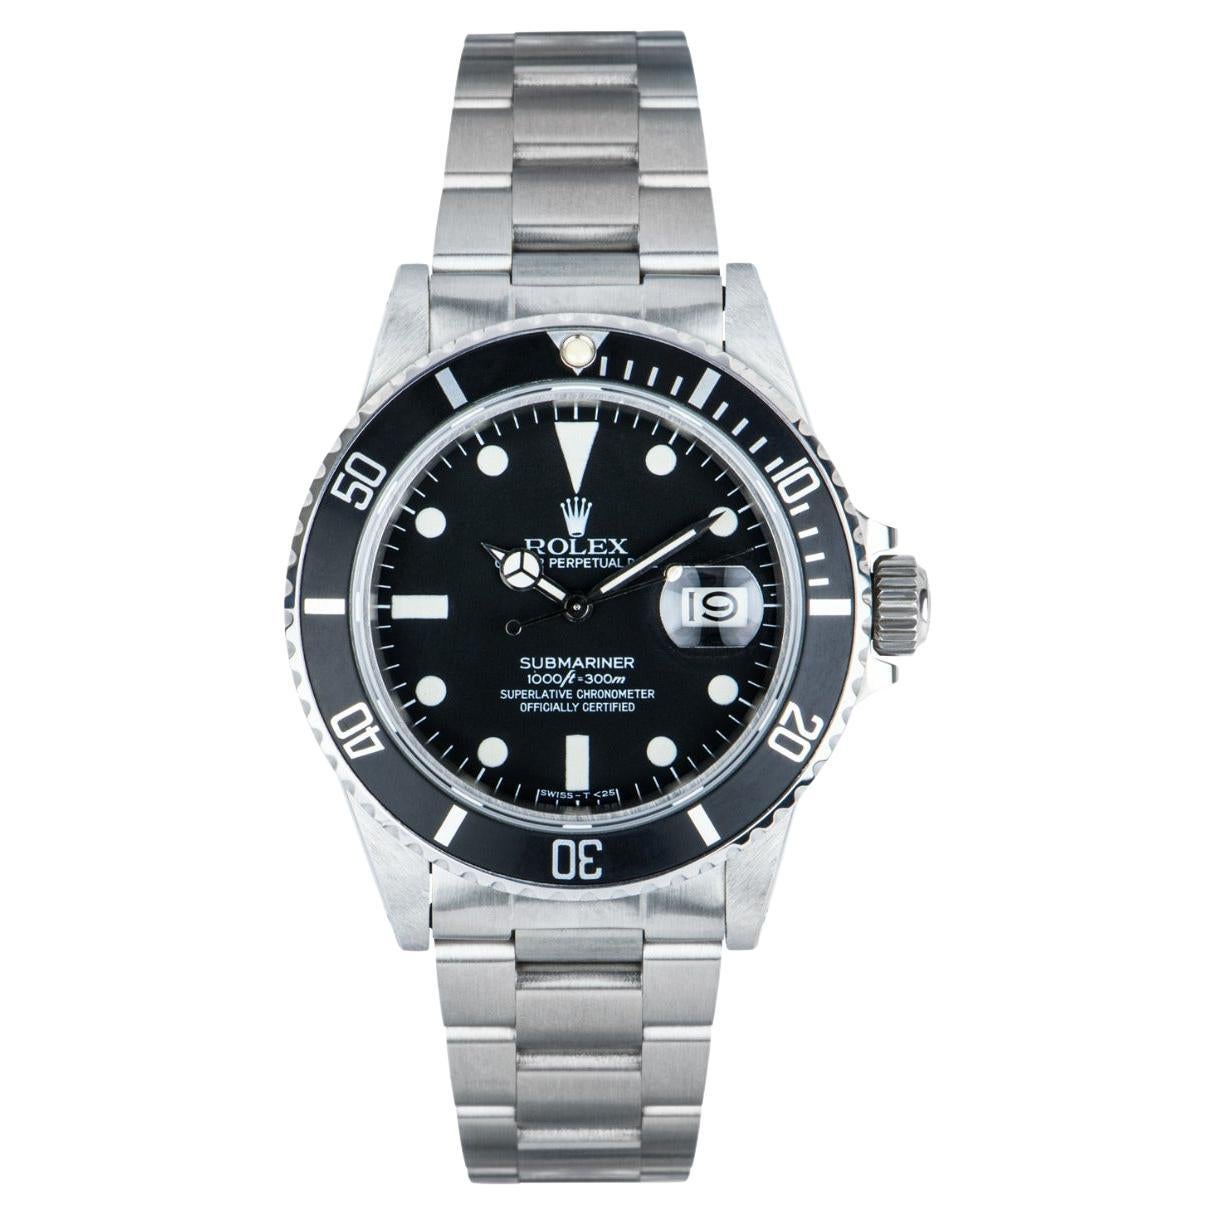 Rolex Submariner Date Transitional 16800 For Sale